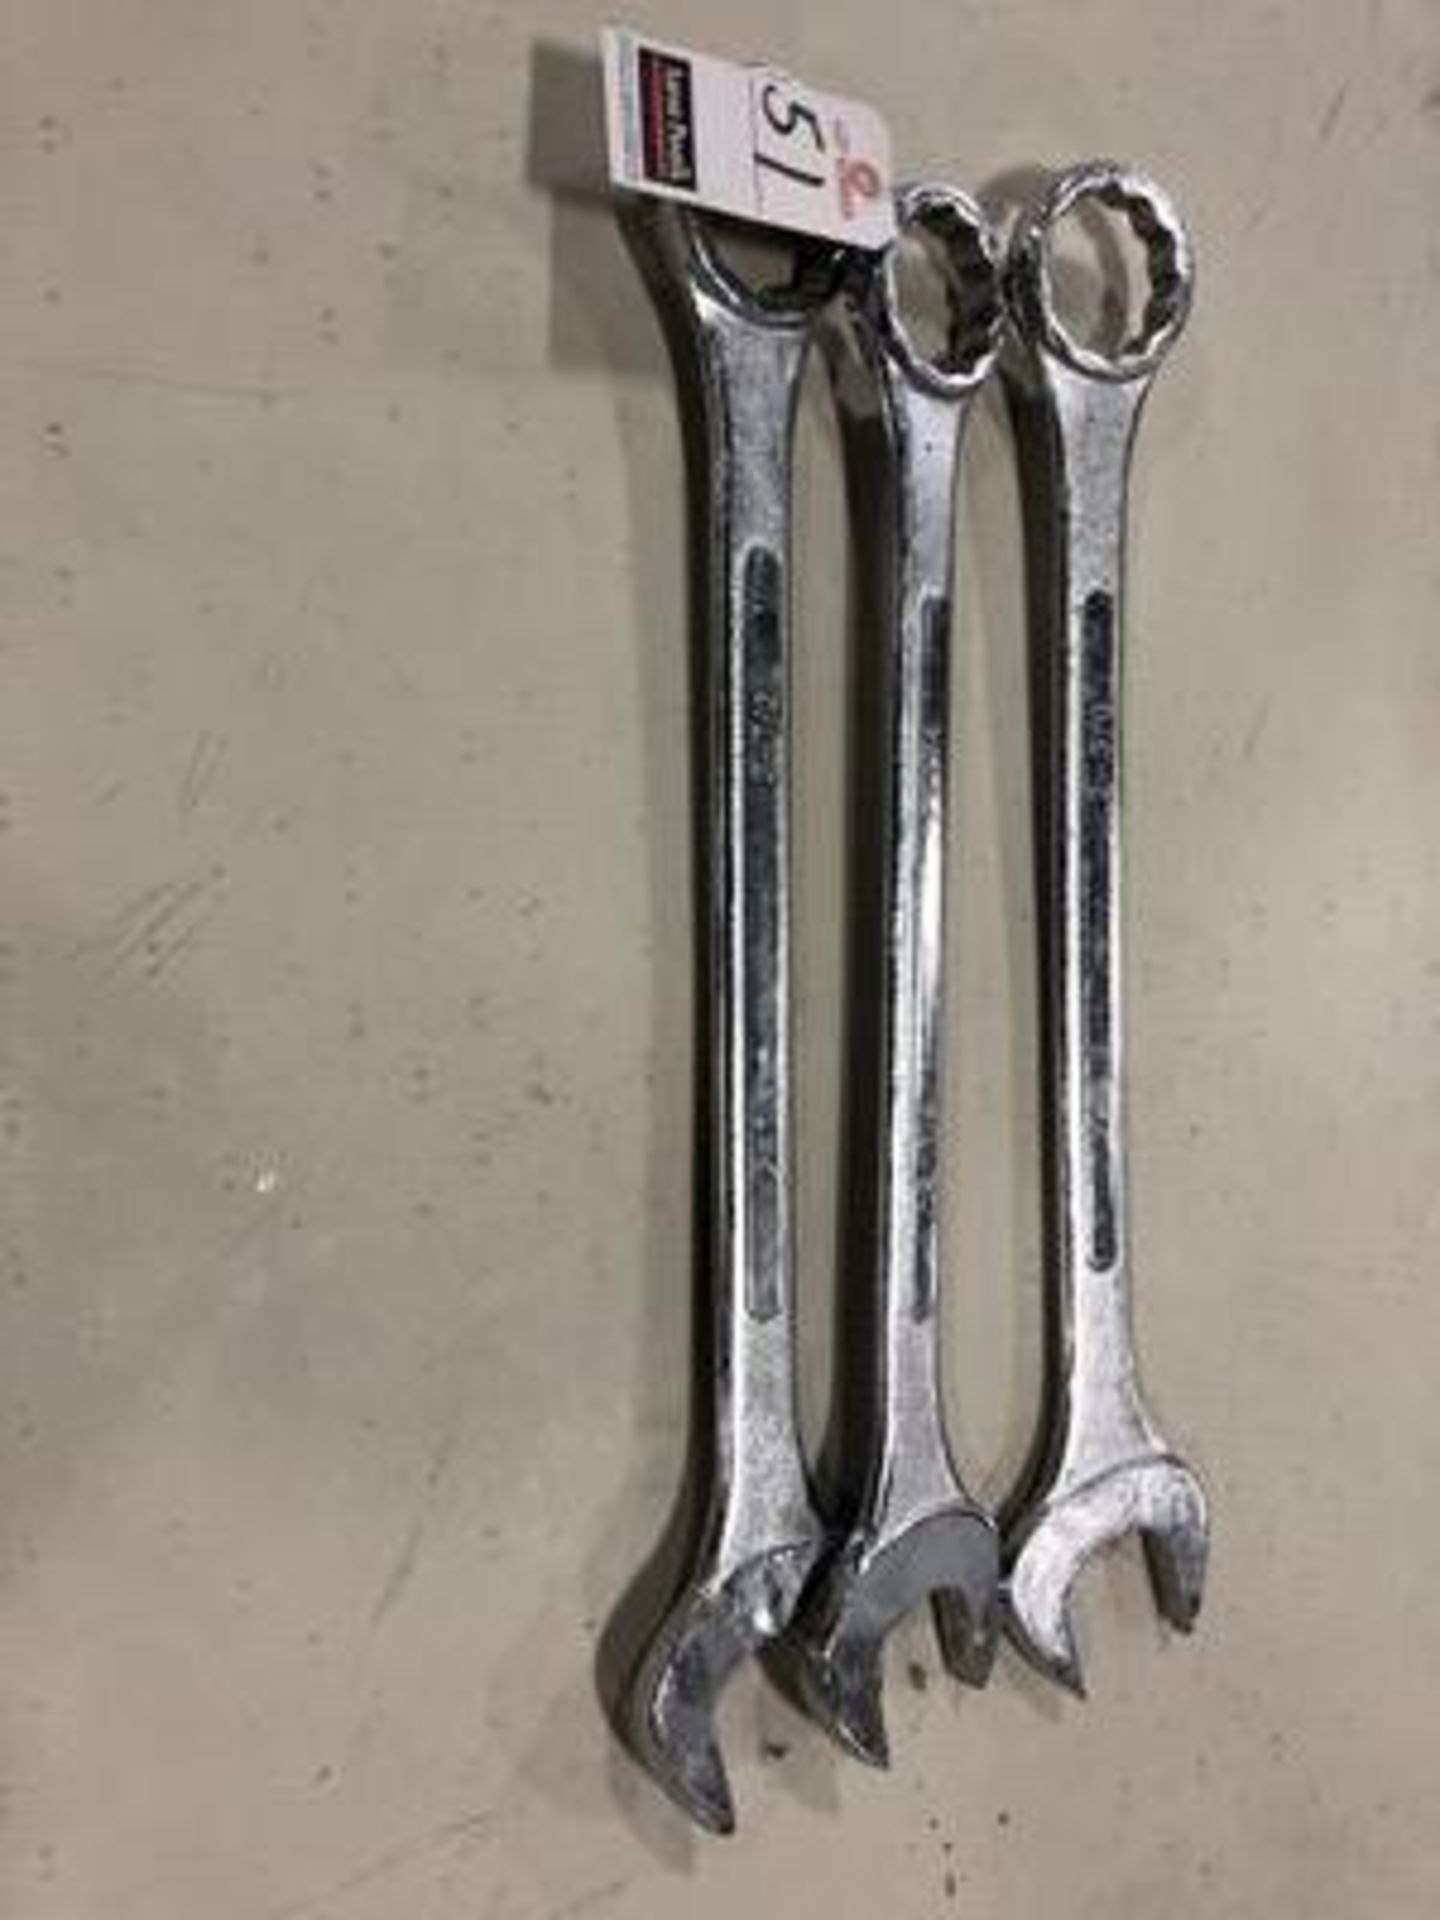 ASS'T OPEN END & BOX WRENCHES